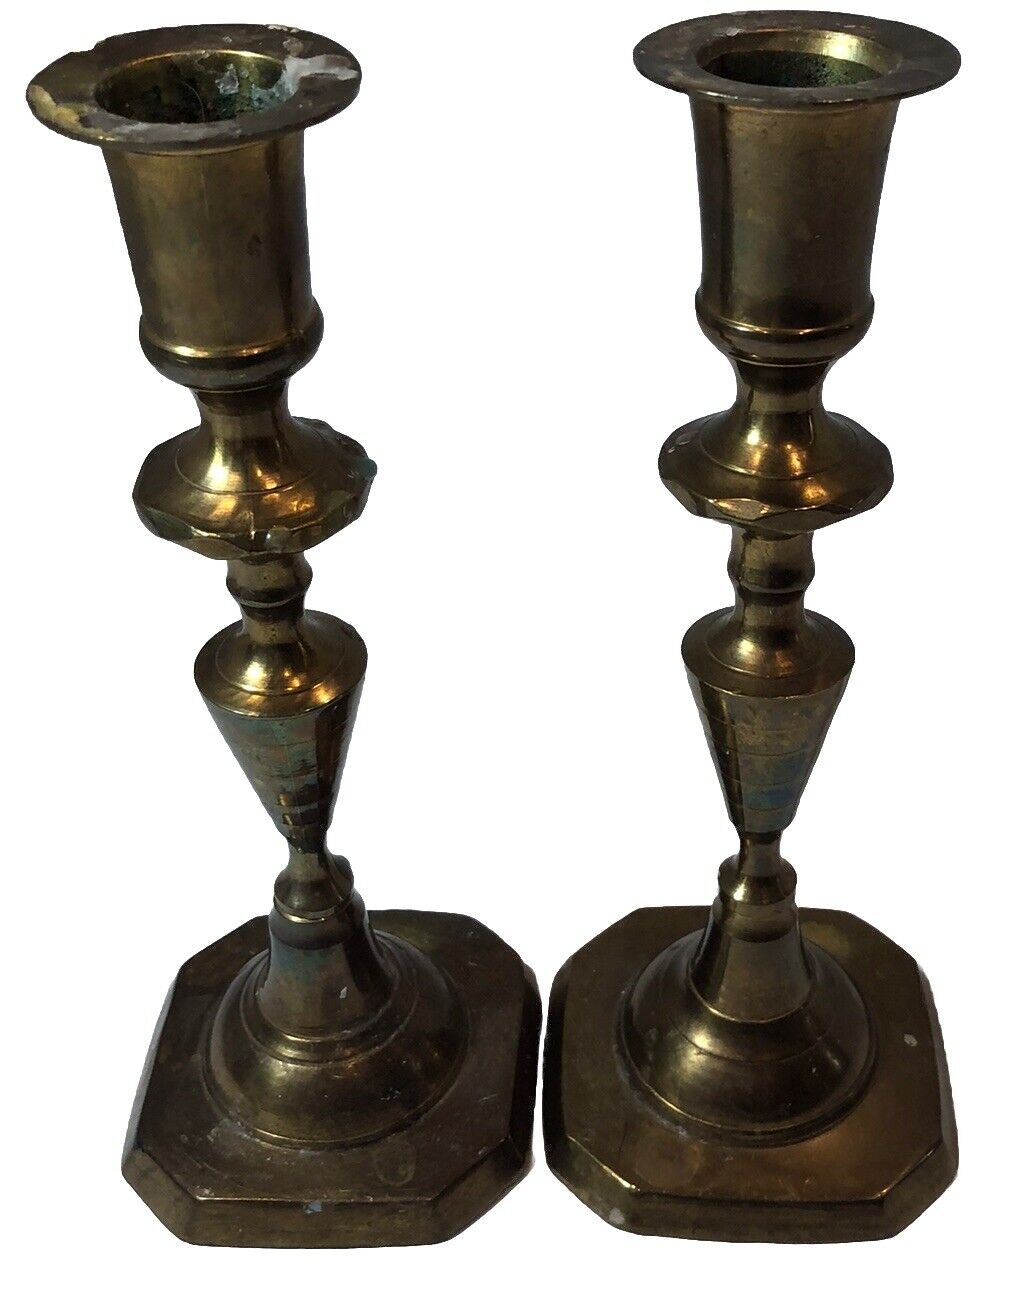 Brass Candlestick Holders Approx. 8” Classic MCM Set Of 2 Hollywood Regency VTG